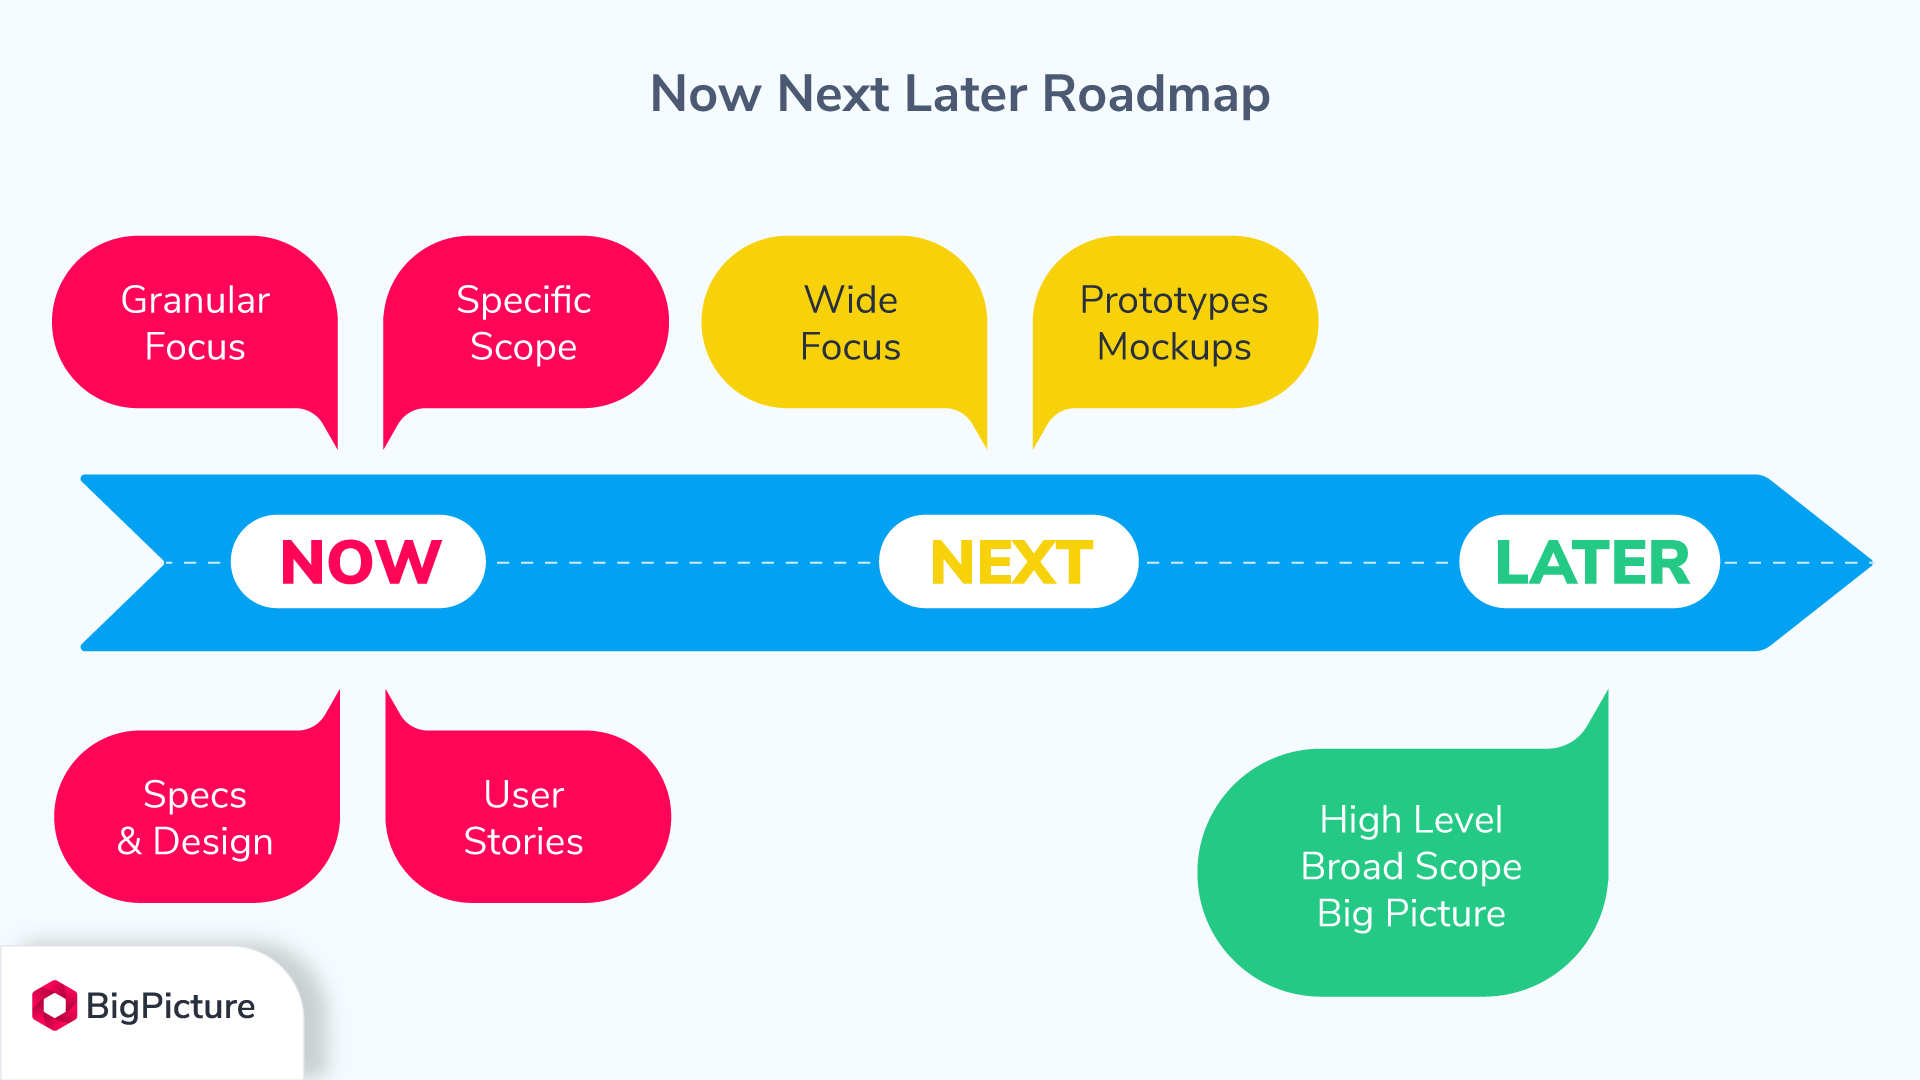 Now next later roadmap